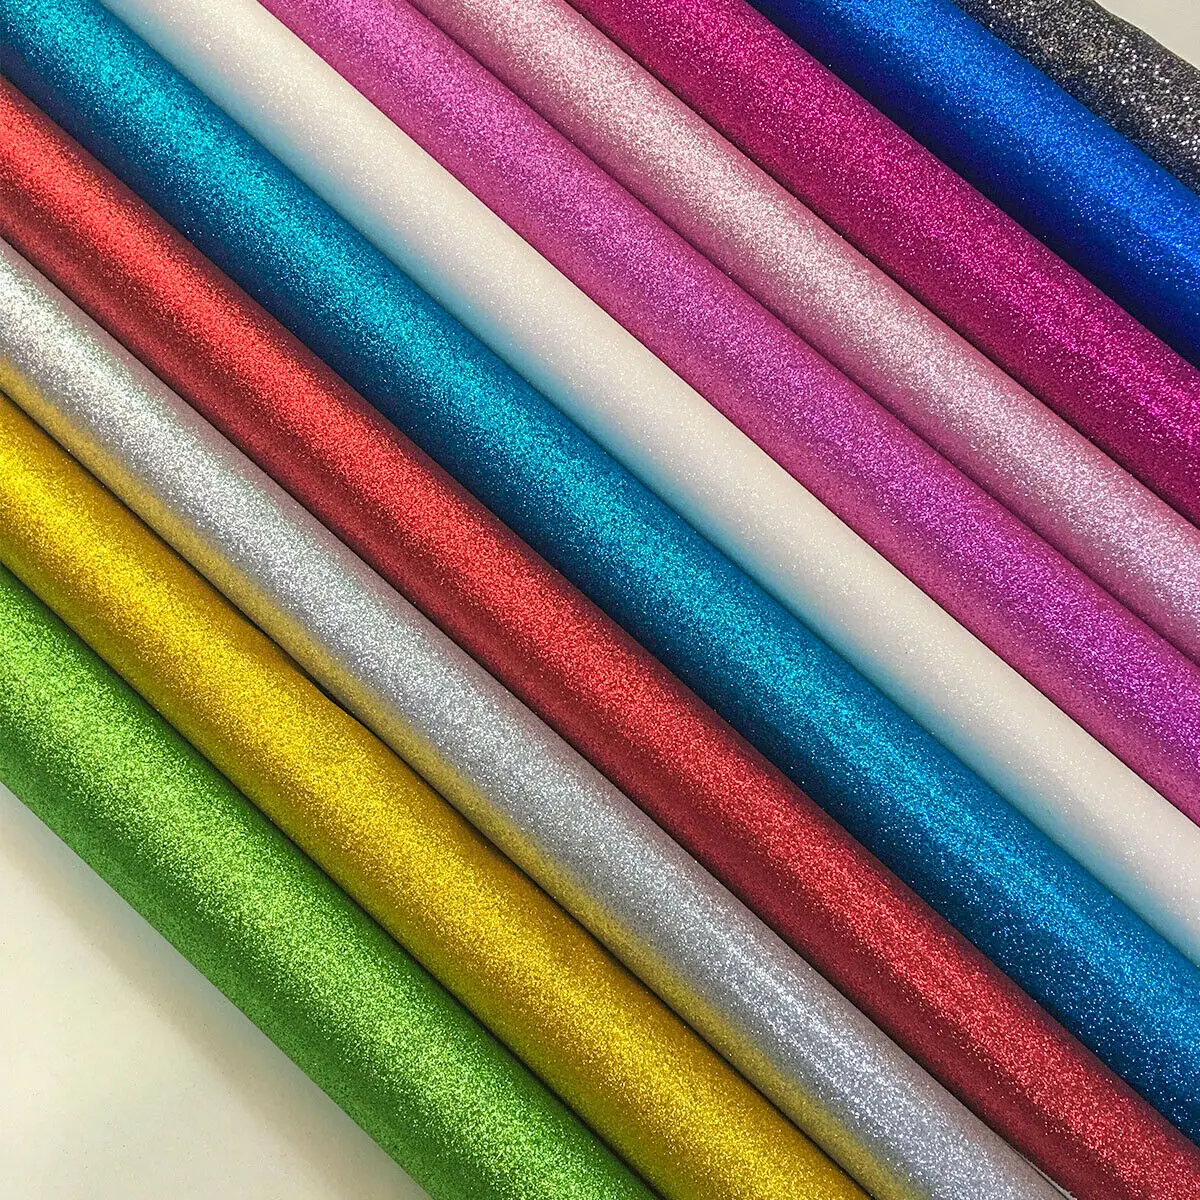 Frosted FINE Glitter Vinyl Sewing Fabric Sparkle Shiny iridescent  Faux PU Leather Craft DIY Material Bows Bag Decor Roll Sheets